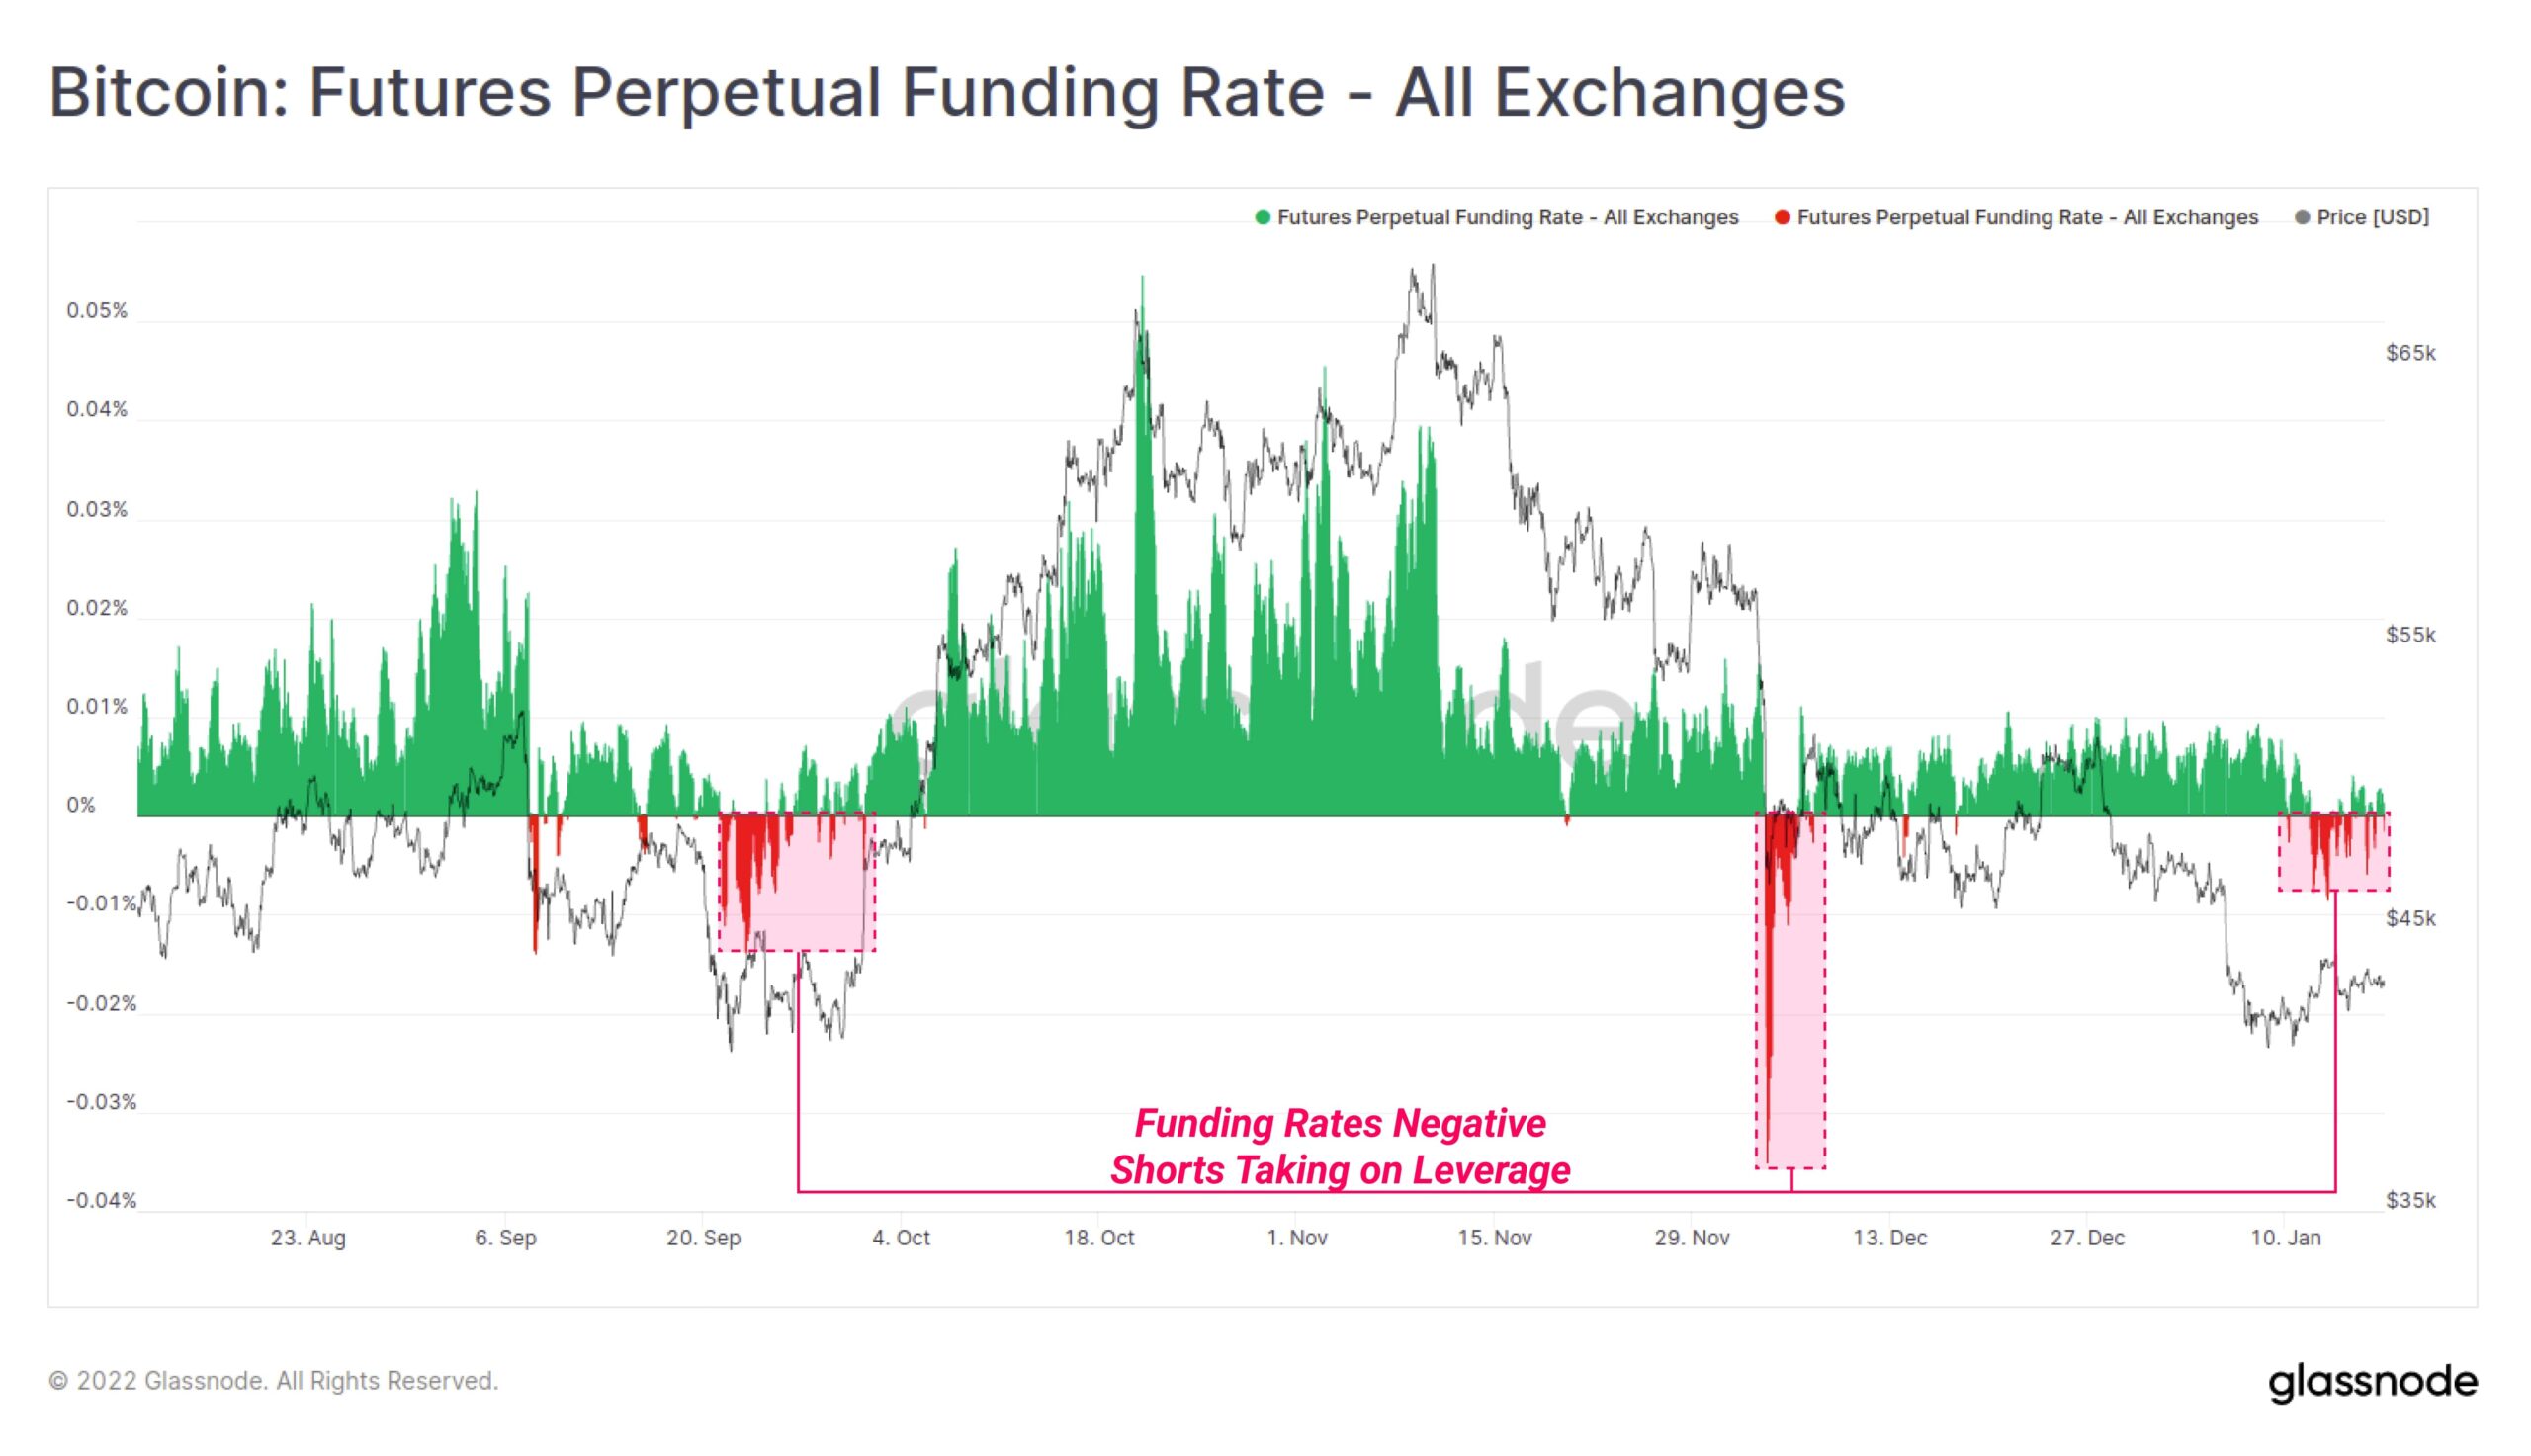 Bitcoin: Futures Perpetual Funding Rate - All Exchanges